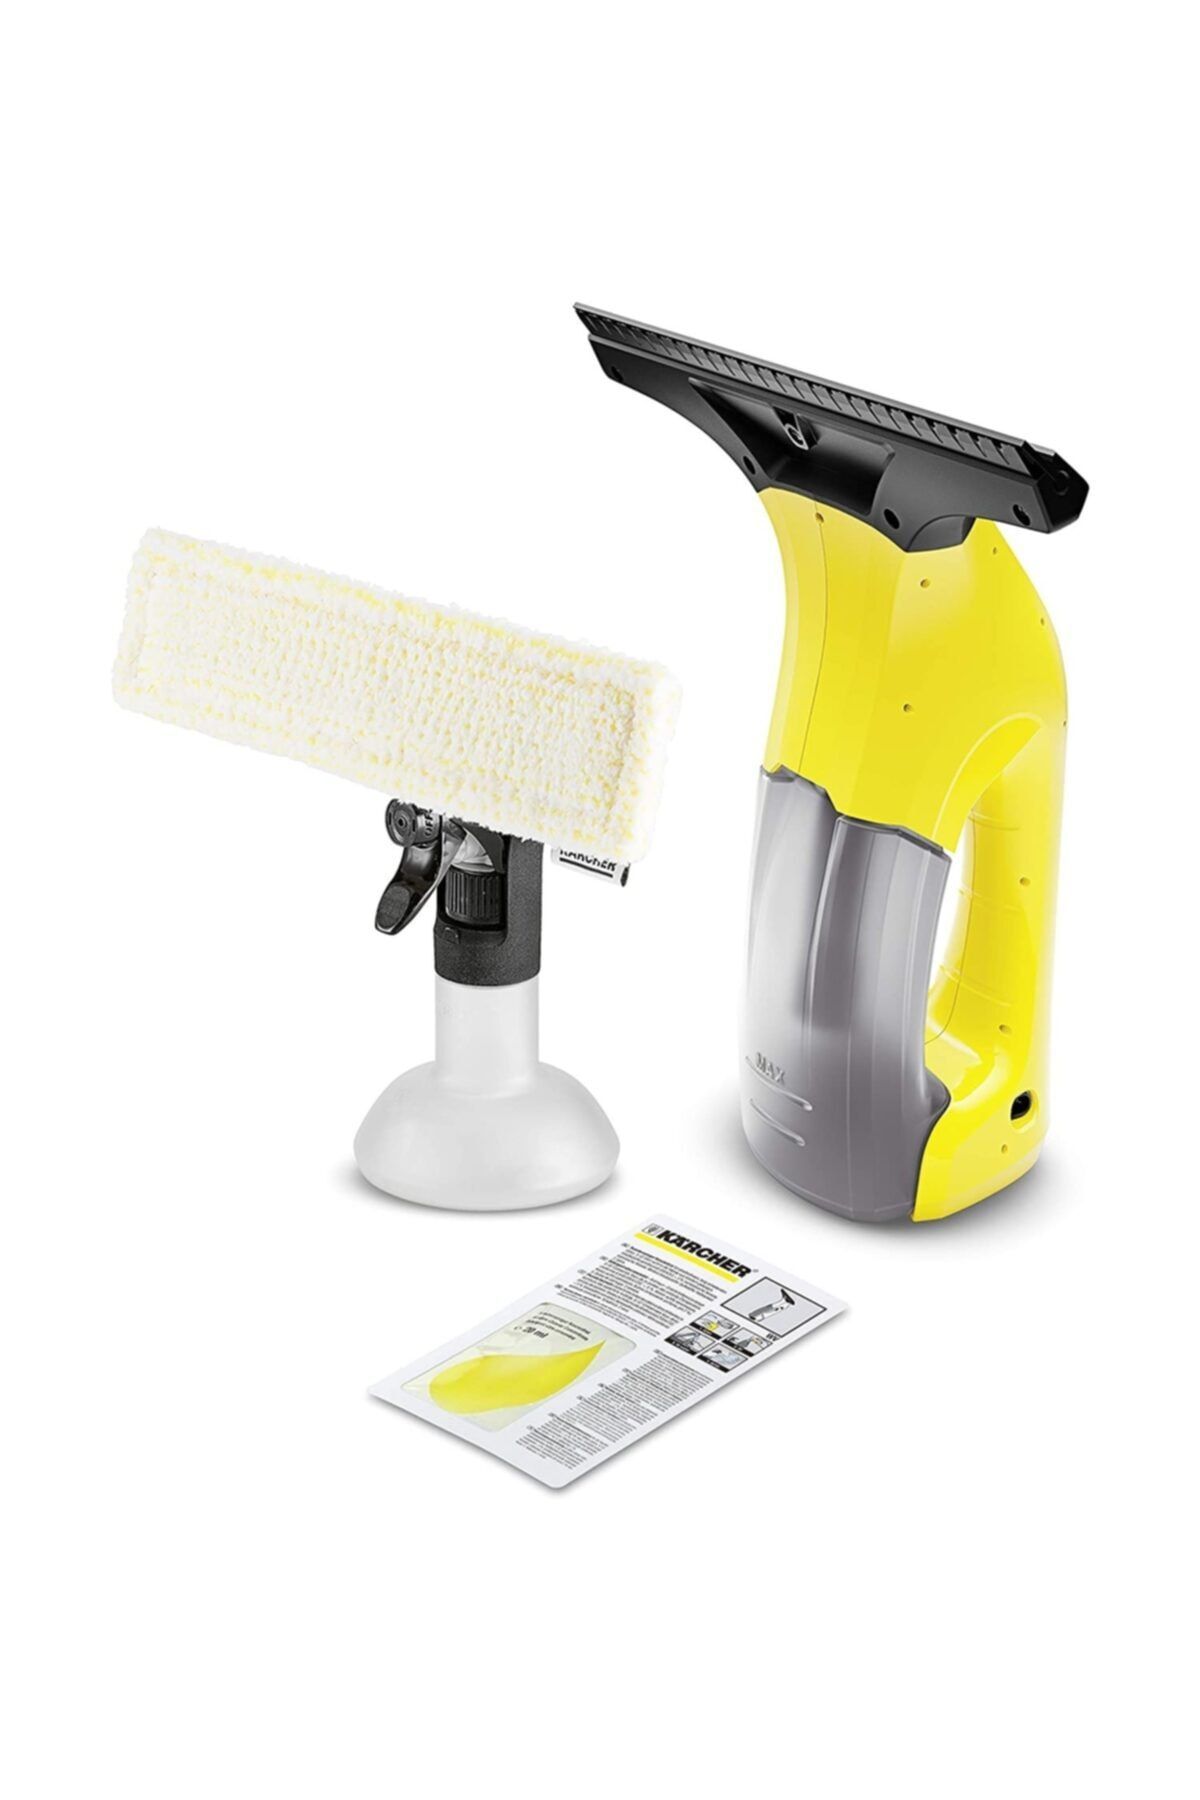 Karcher 16332030 Wv 1 Plus - Electric Window Washer - 3.65v Fixed Battery